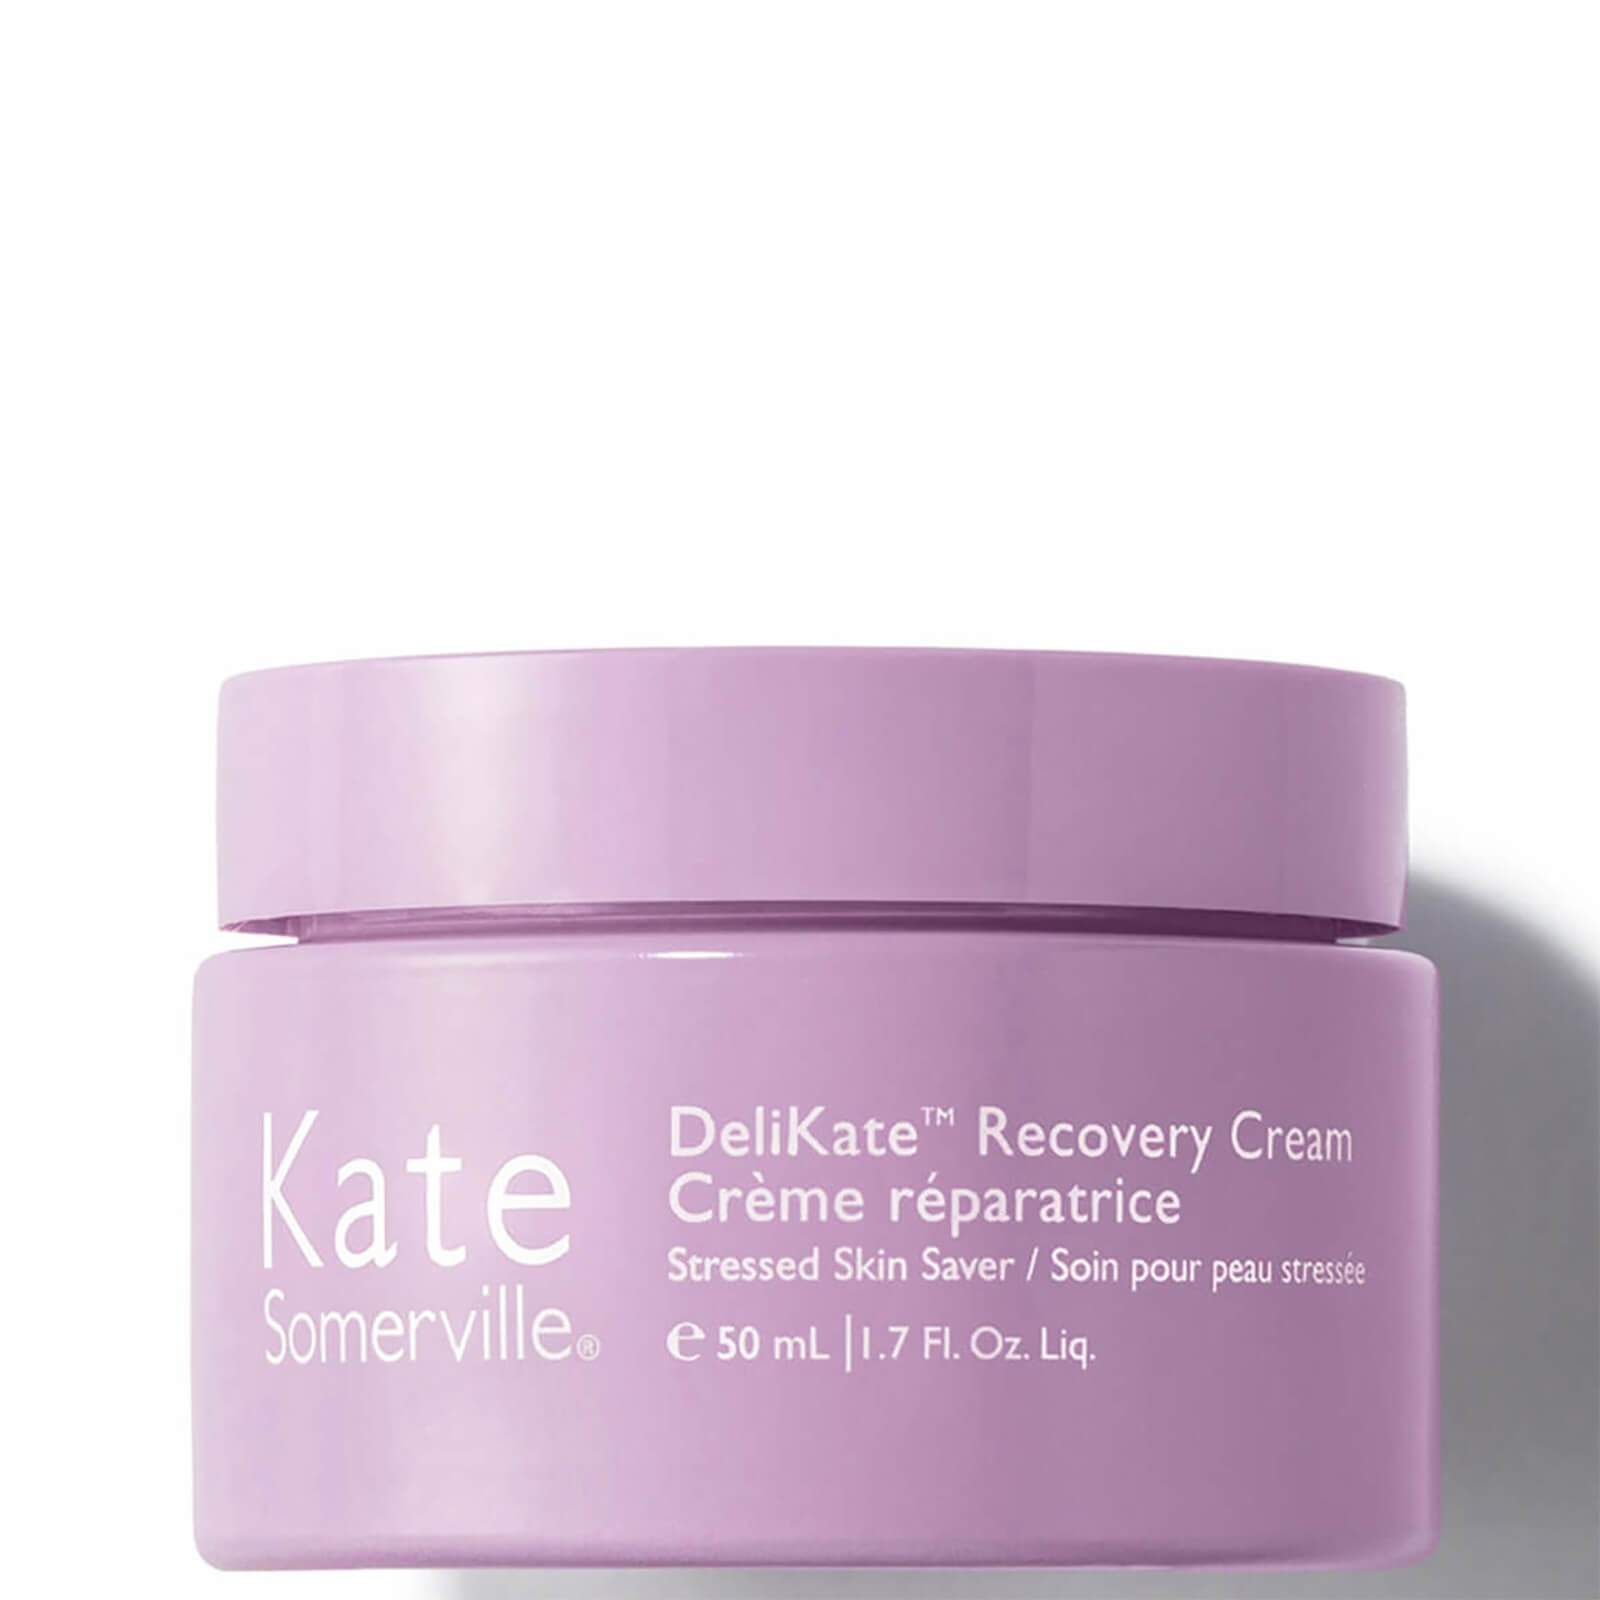 Image of Kate Somerville DeliKate Recovery Cream 50ml